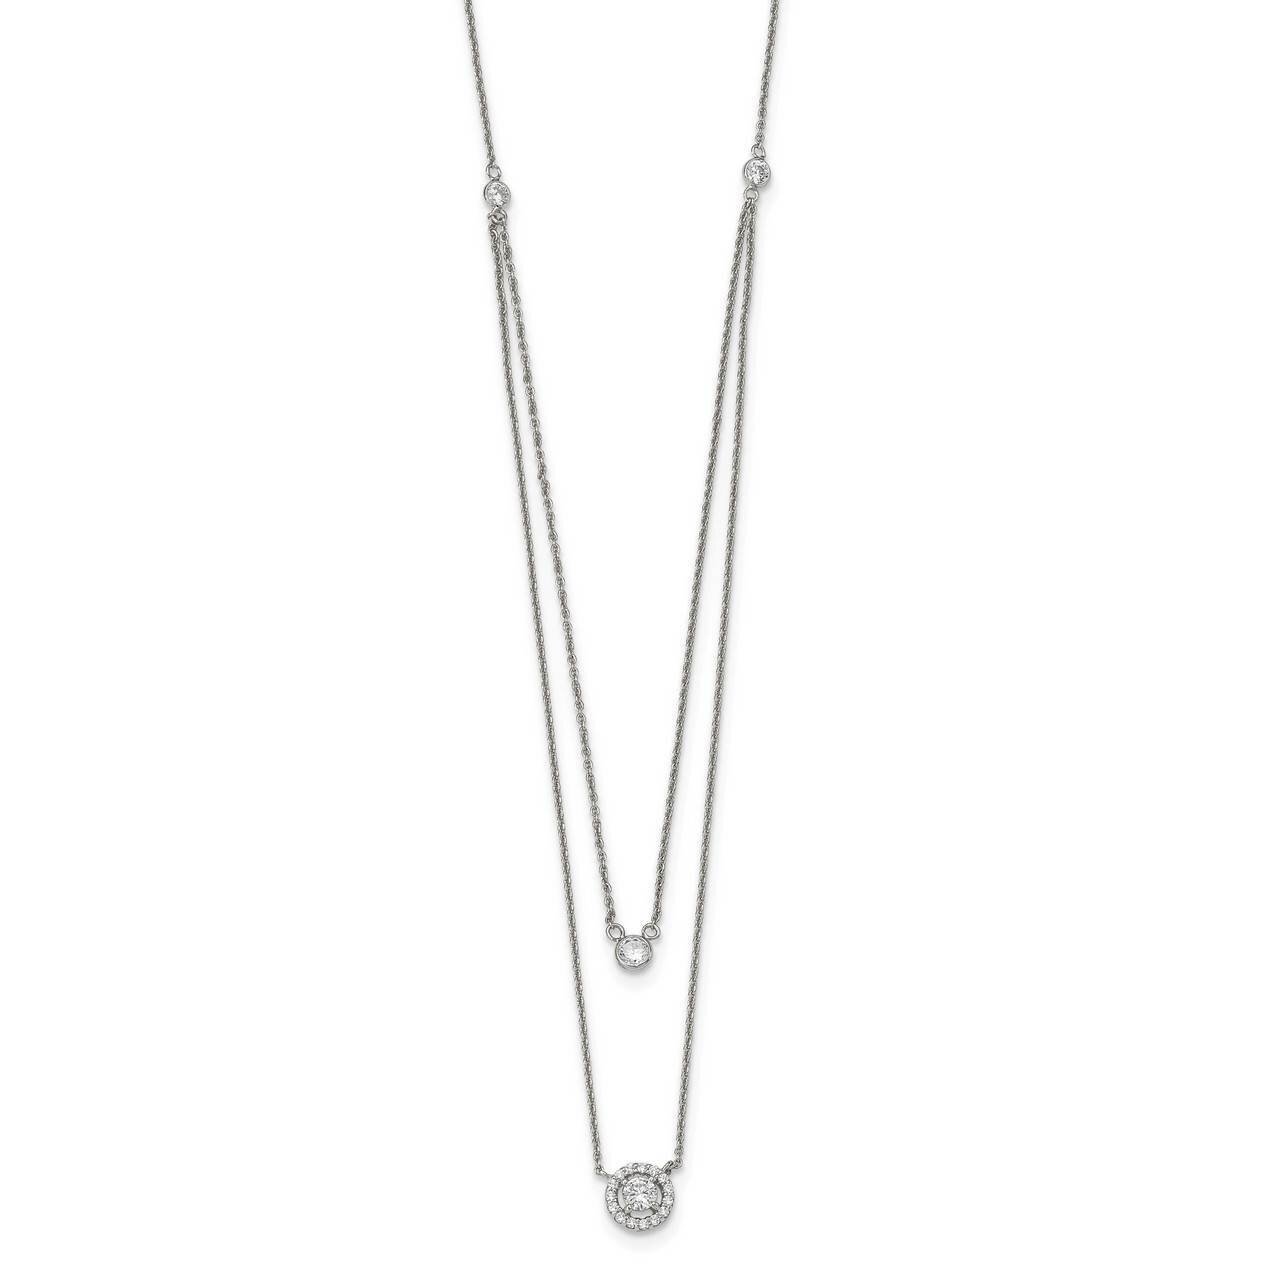 Multi-Strand Necklace with 1.75 inch Extender Sterling Silver CZ Diamond QG5473-16